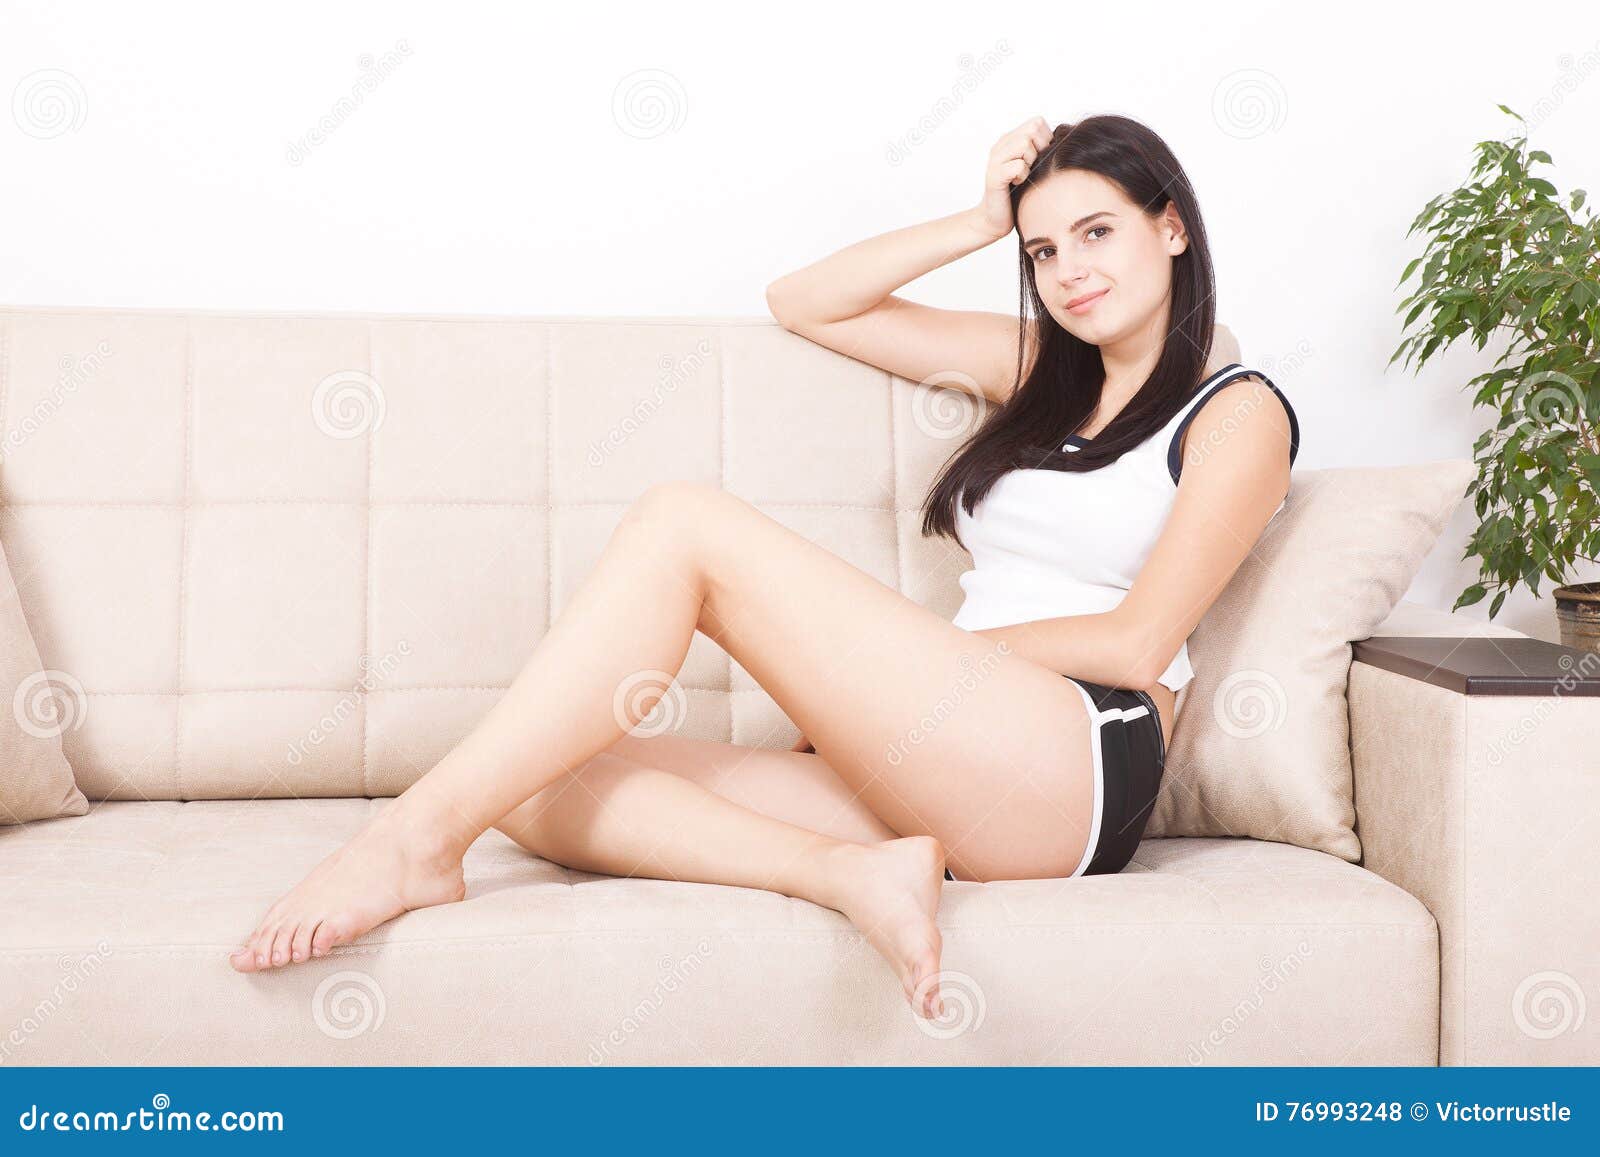 Relaxing Woman Sitting Comfortable in Sofa Lounge Smiling Happy Looking at Camera photo